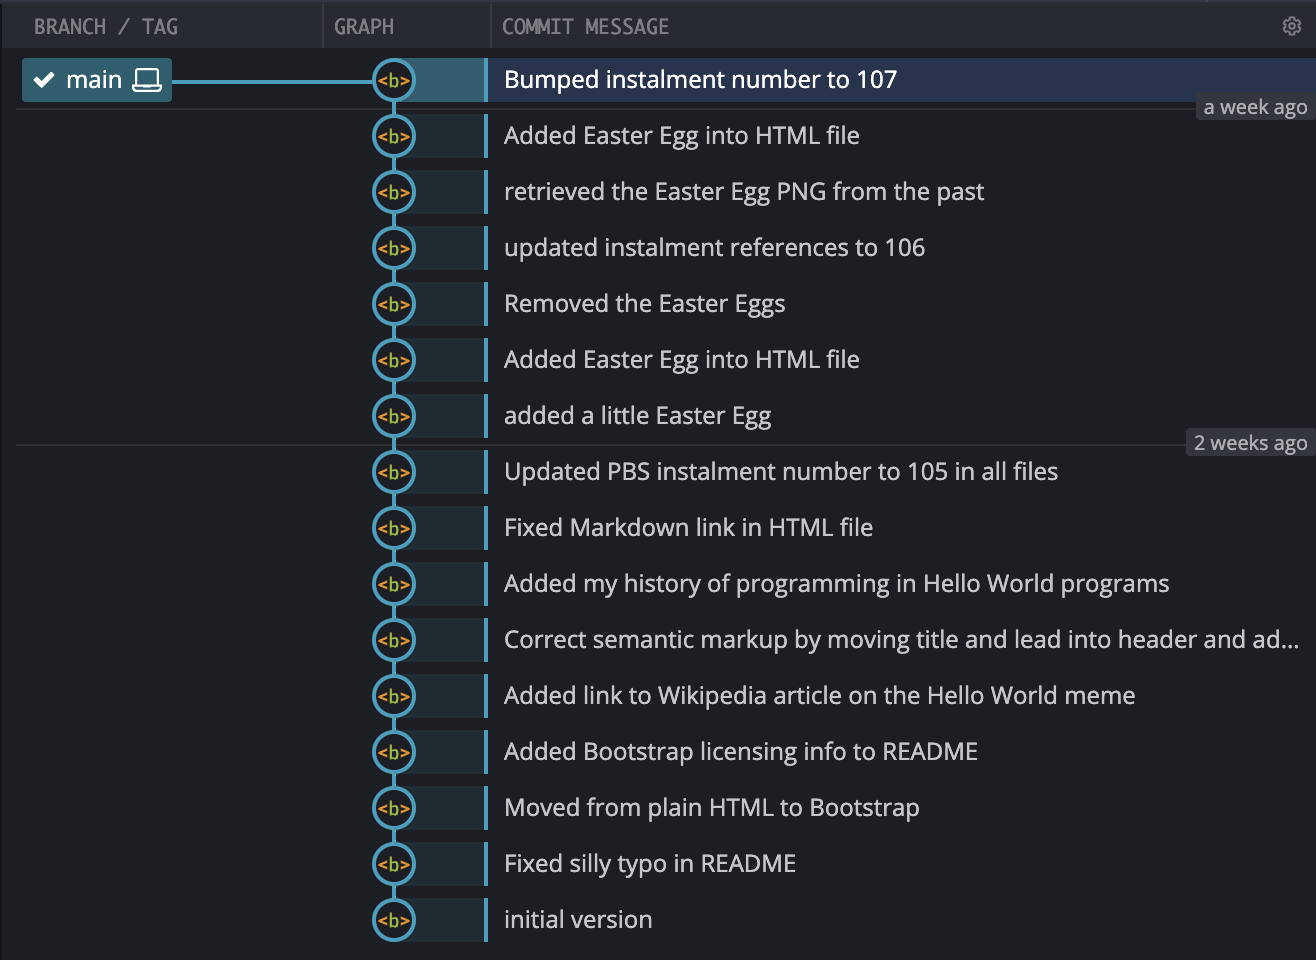 Screen show showing our repository's branches as a vertical line with the initial commit at the bottom and the commit descriptions next to each commit